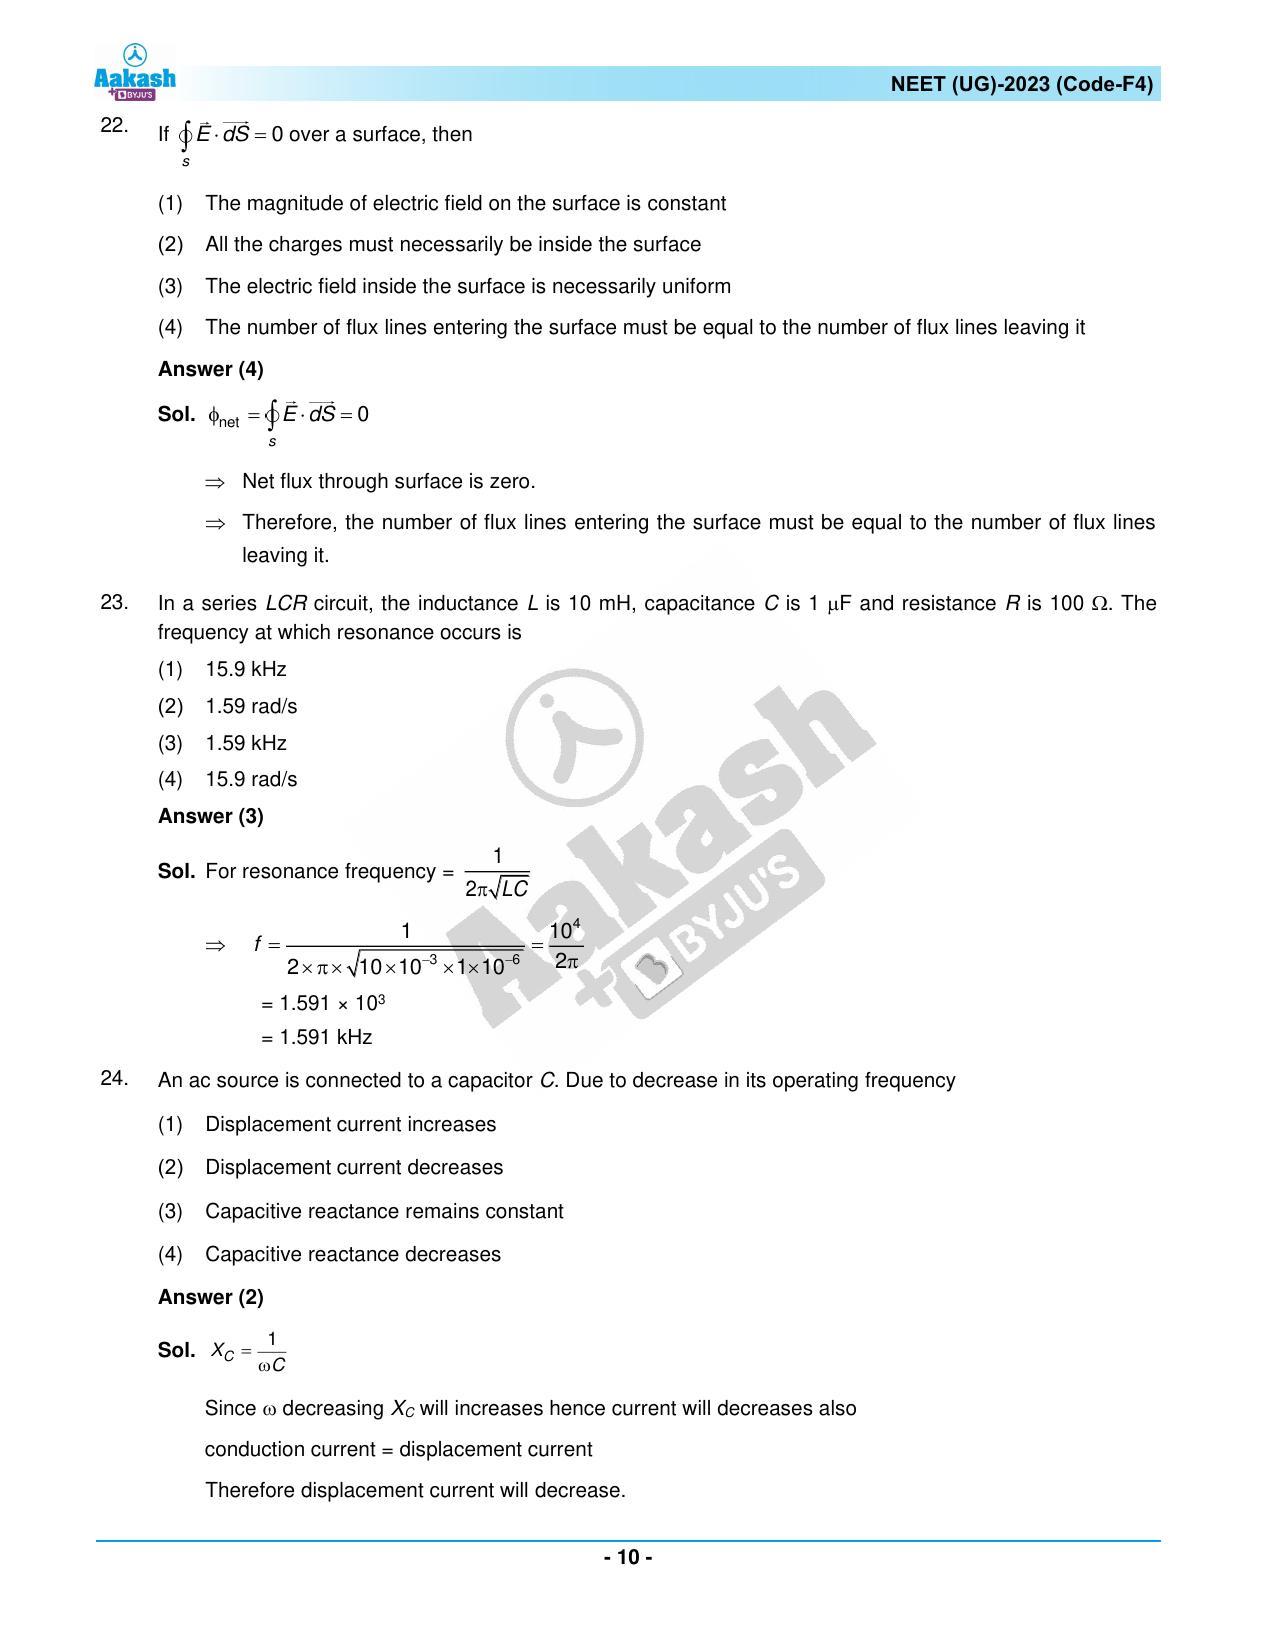 NEET 2023 Question Paper F4 - Page 10